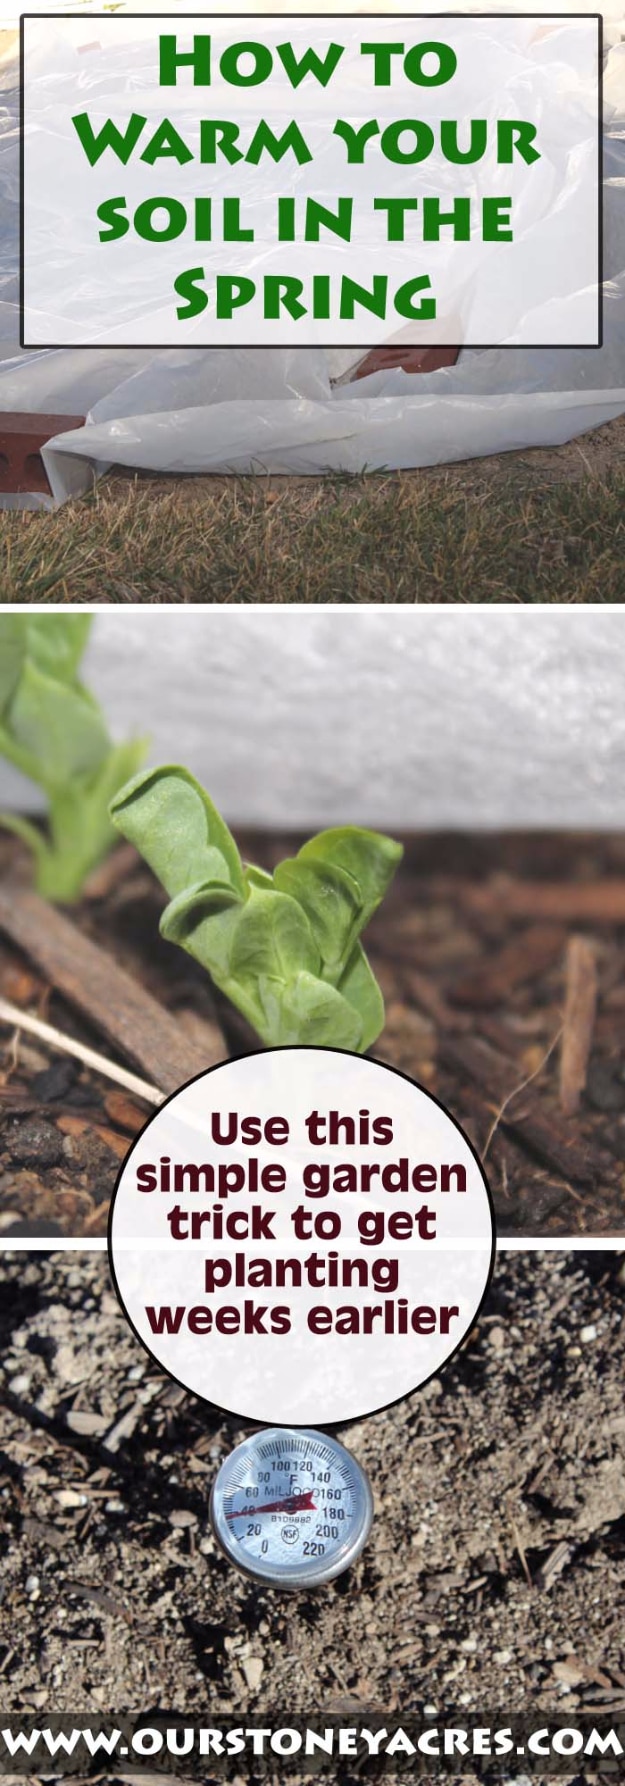 DIY Spring Gardening Projects - Warm Your Soil In The Spring - Cool and Easy Planting Tips for Spring Garden - Step by Step Tutorials for Growing Seeds, Plants, Vegetables and Flowers in You Yard - DIY Project Ideas for Women and Men - Creative and Quick Backyard Ideas For Summer 